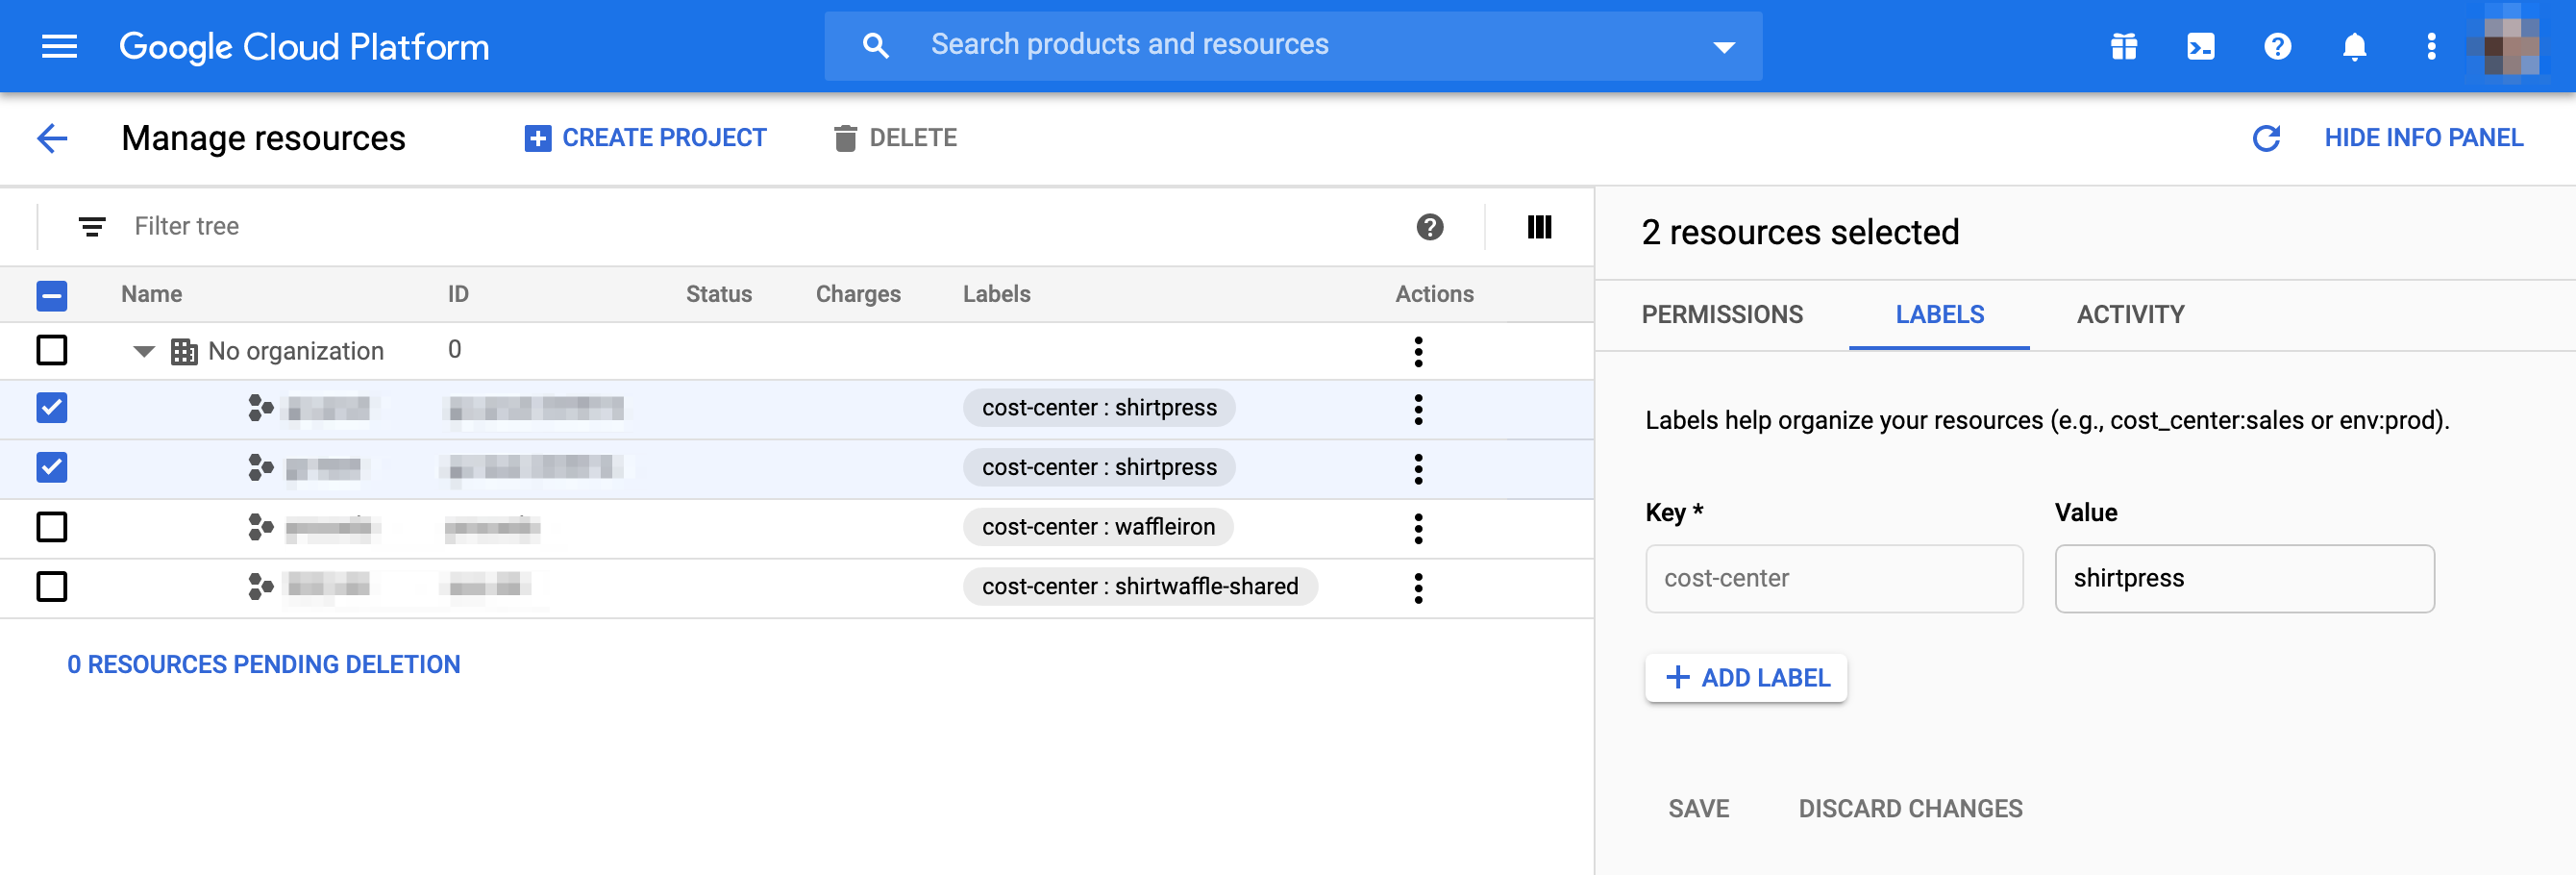 GCP Cloud Console Resource Manager